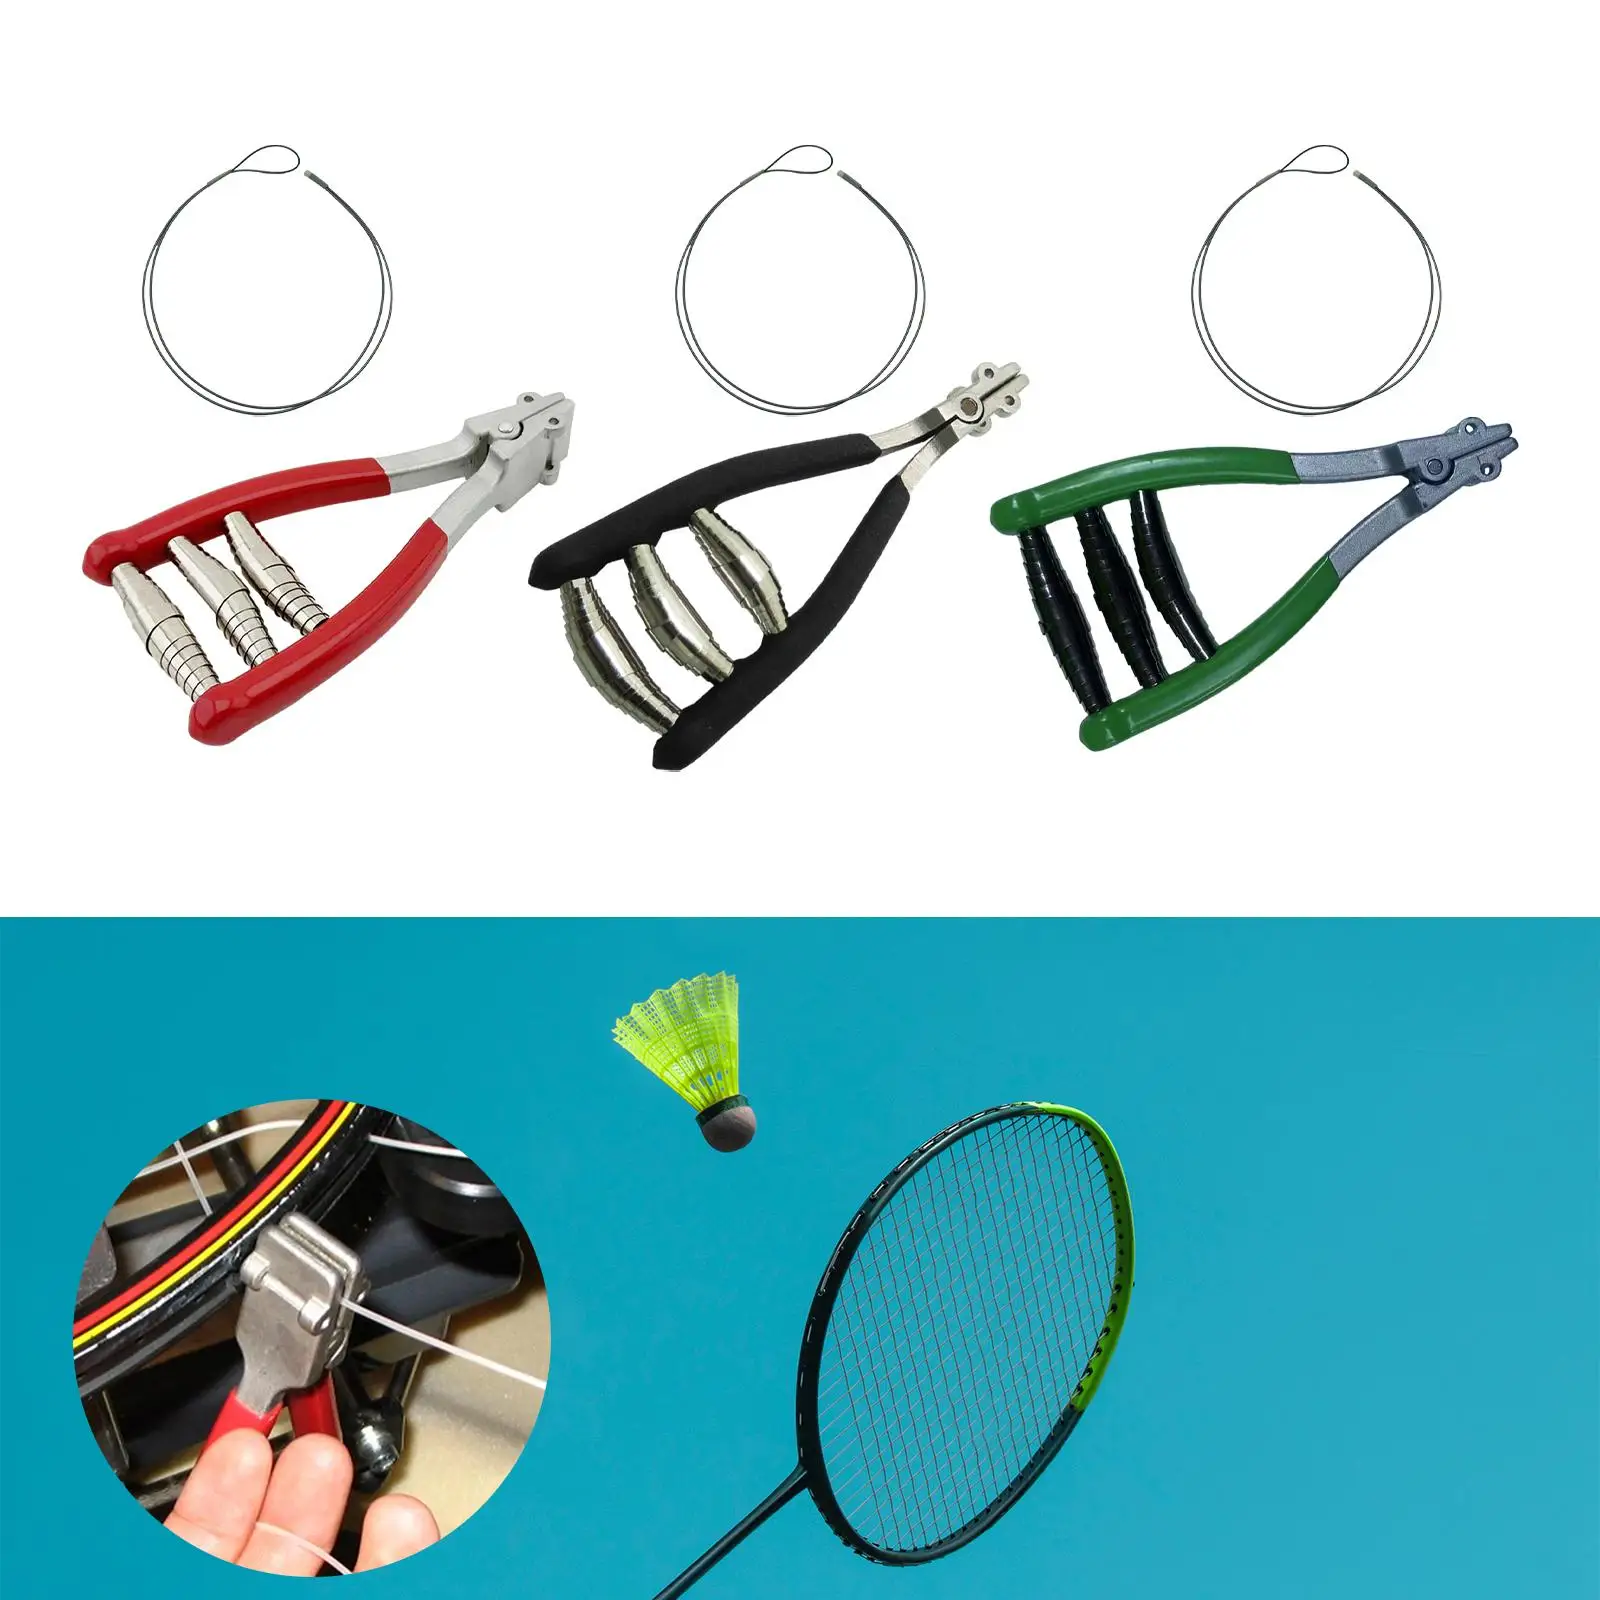 Sports Starting Clamp Stringing Clamp 3 Spring Starter Clamp Manual Clamping Tool for Squash Tennis Badminton Racket Accessories